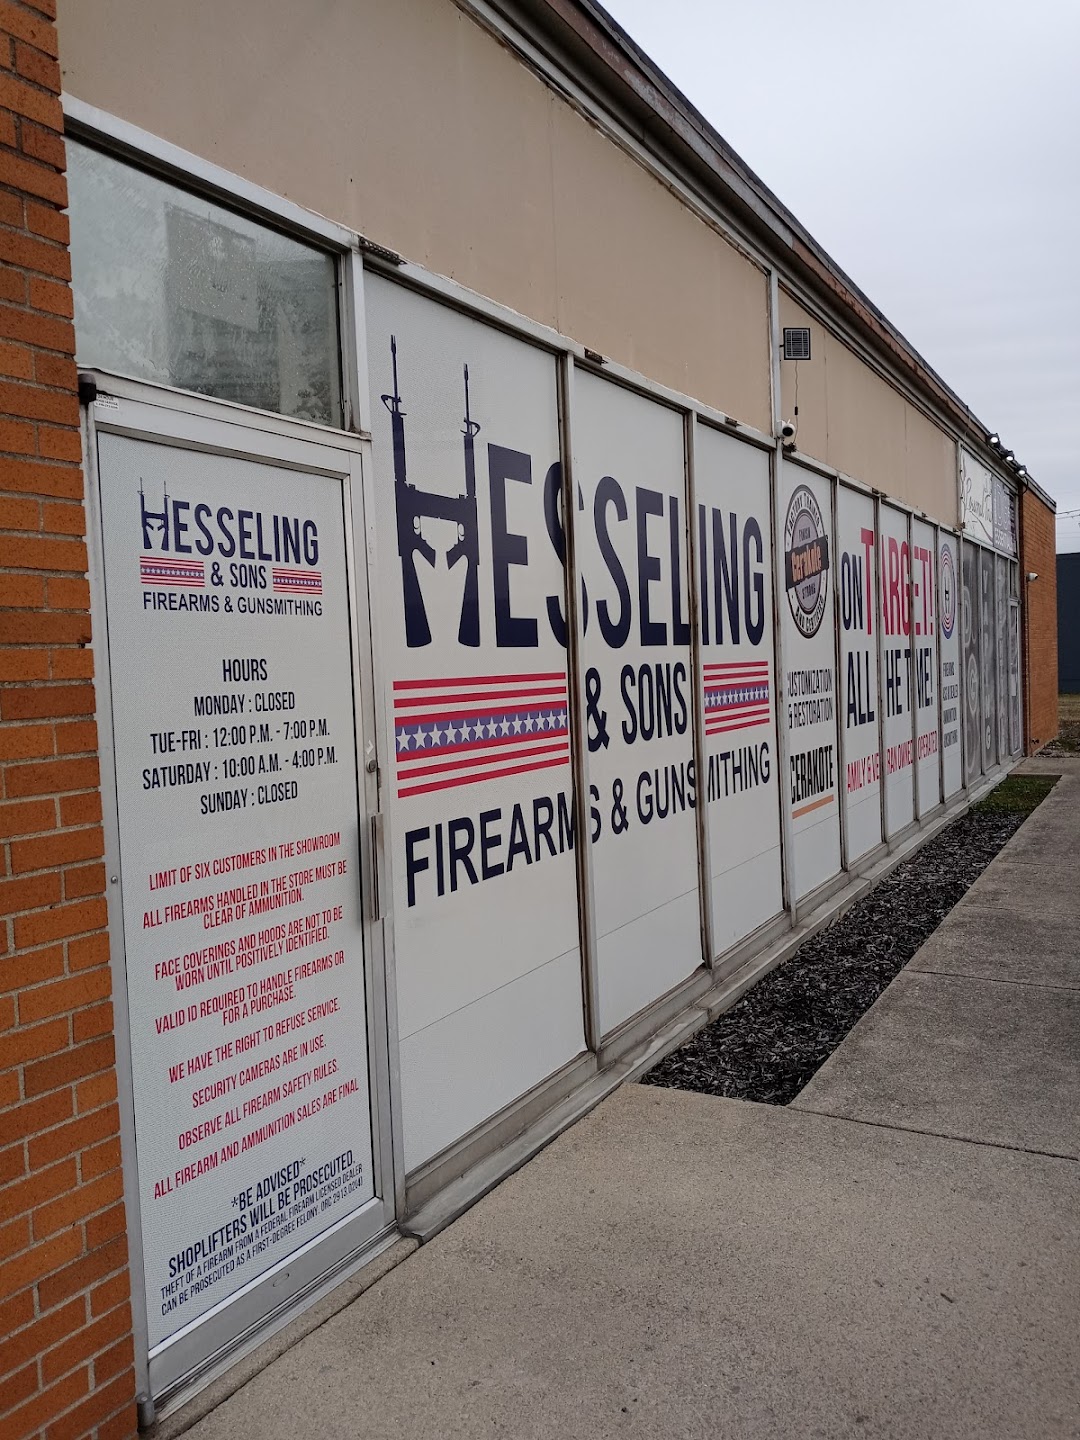 Hesseling & Sons Firearms and Gunsmithing